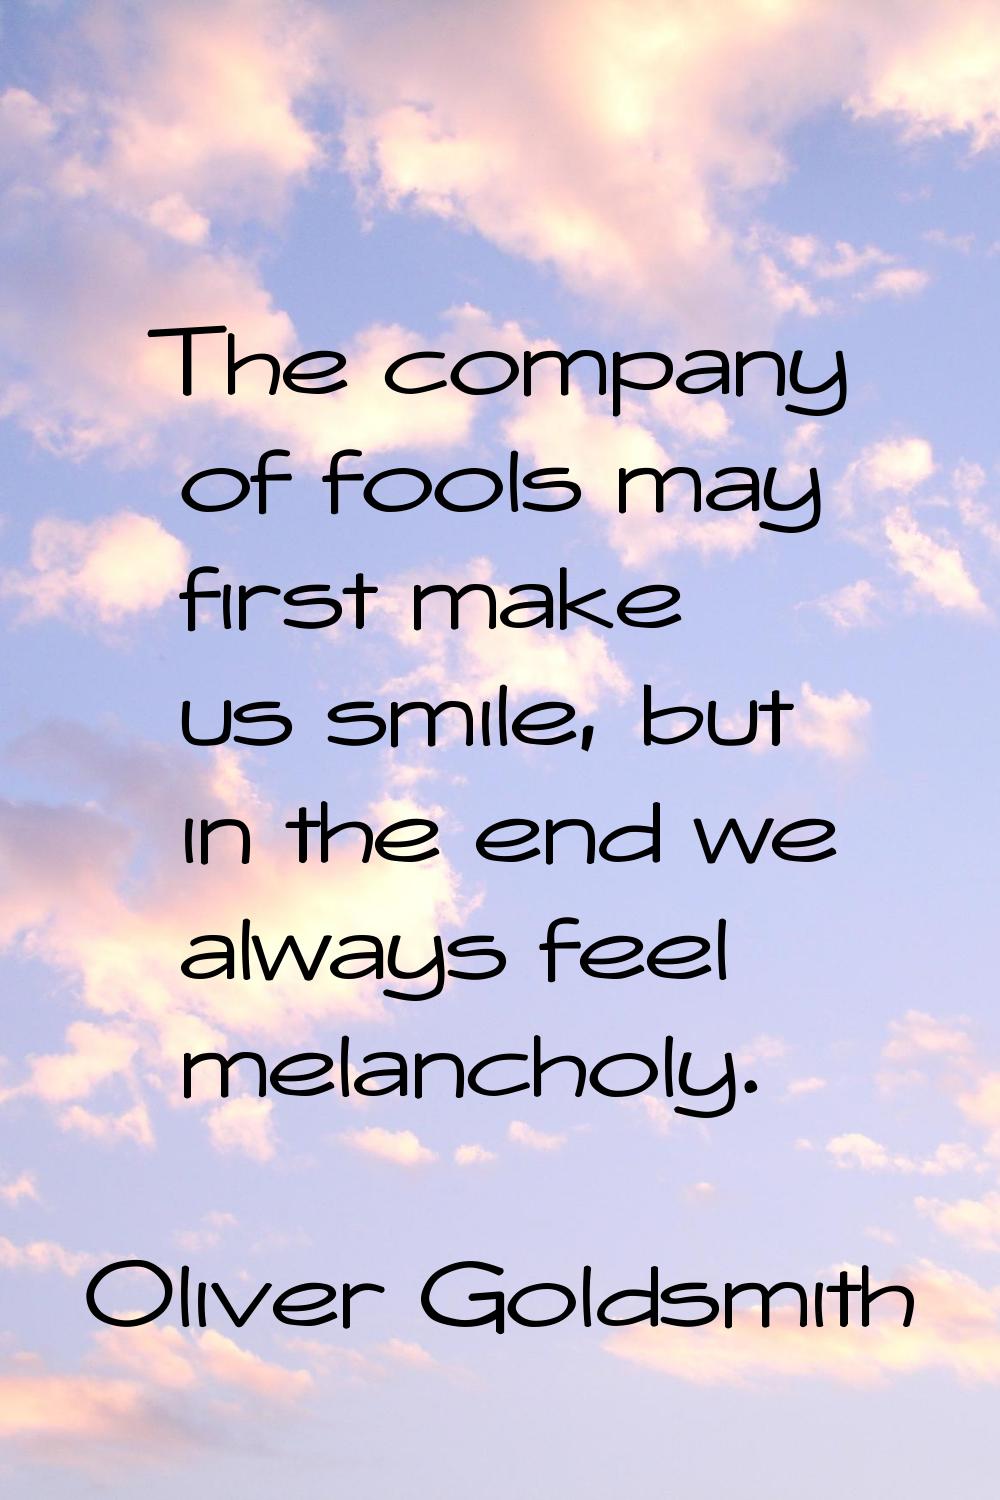 The company of fools may first make us smile, but in the end we always feel melancholy.